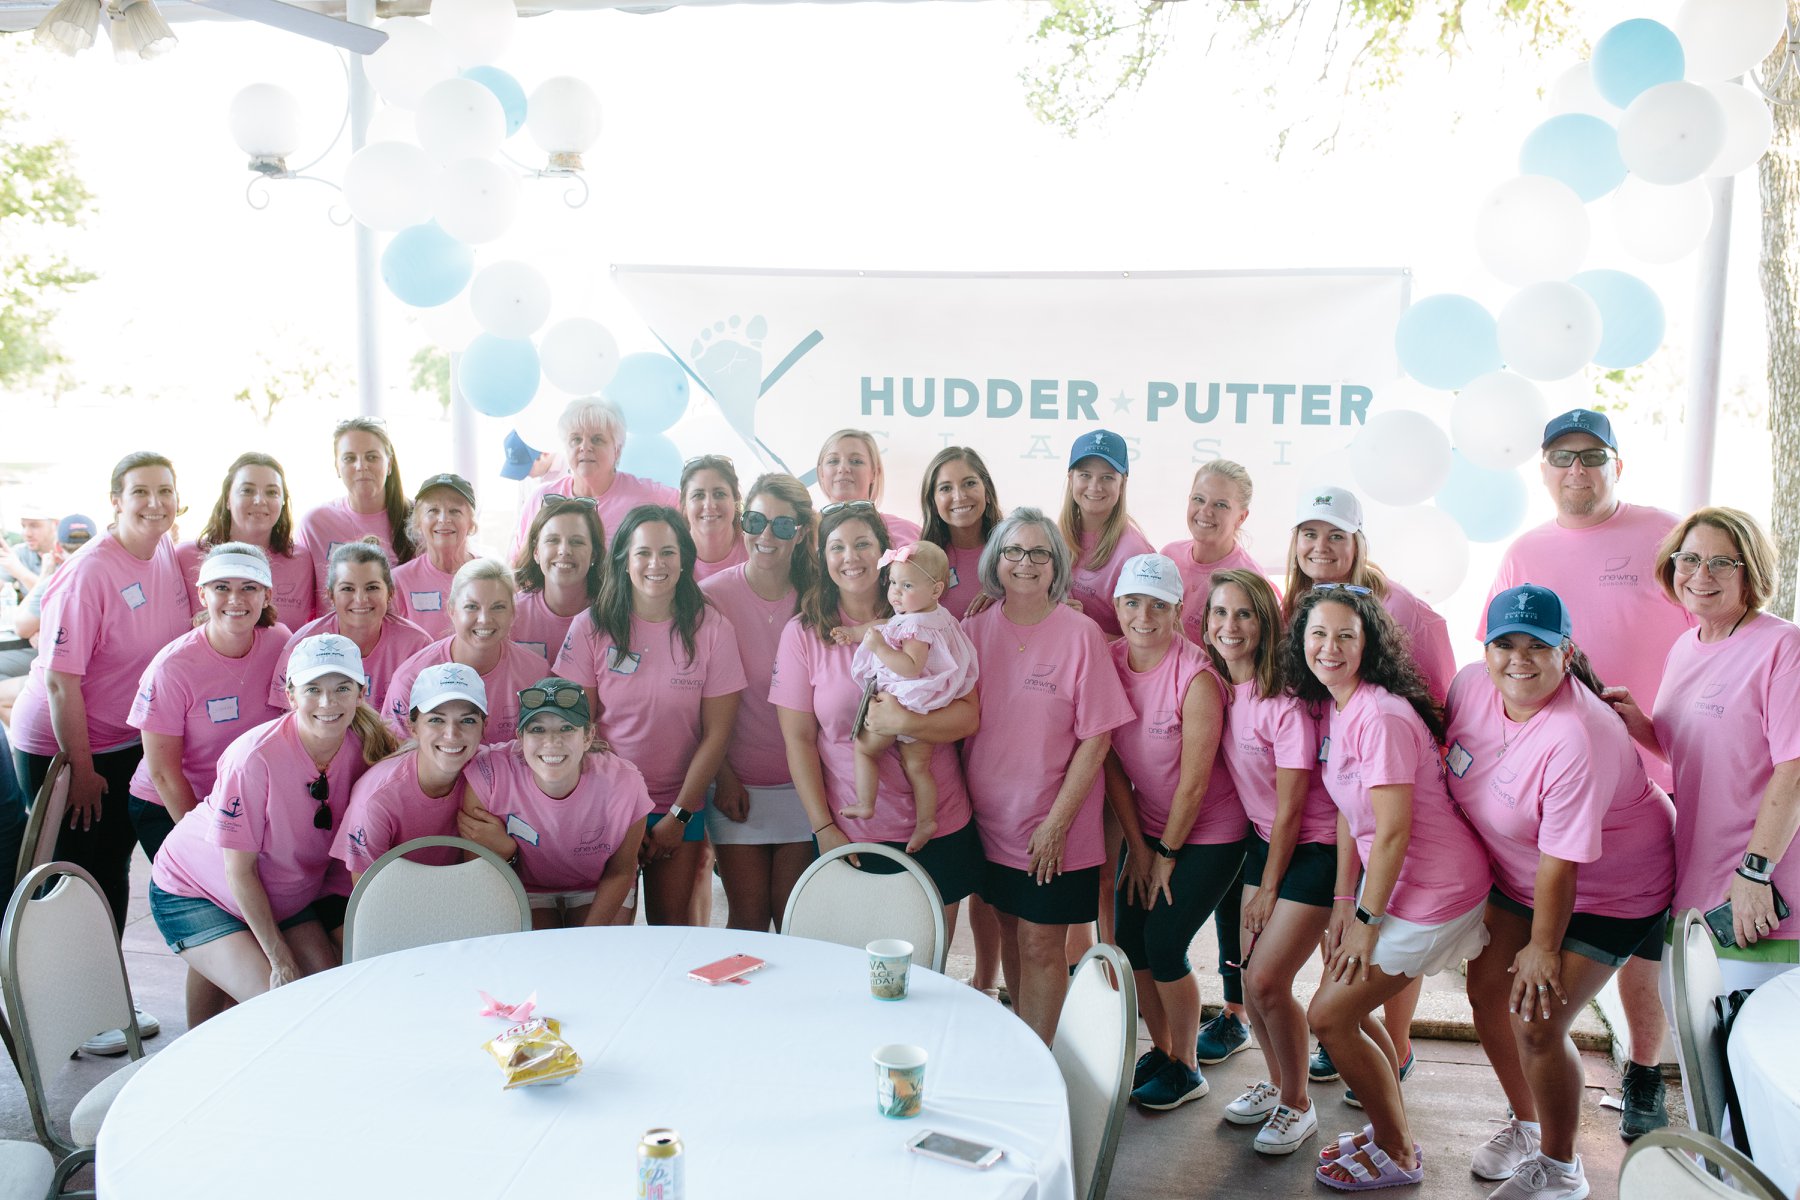 One Wing Foundation Hudder Putter event in 2019